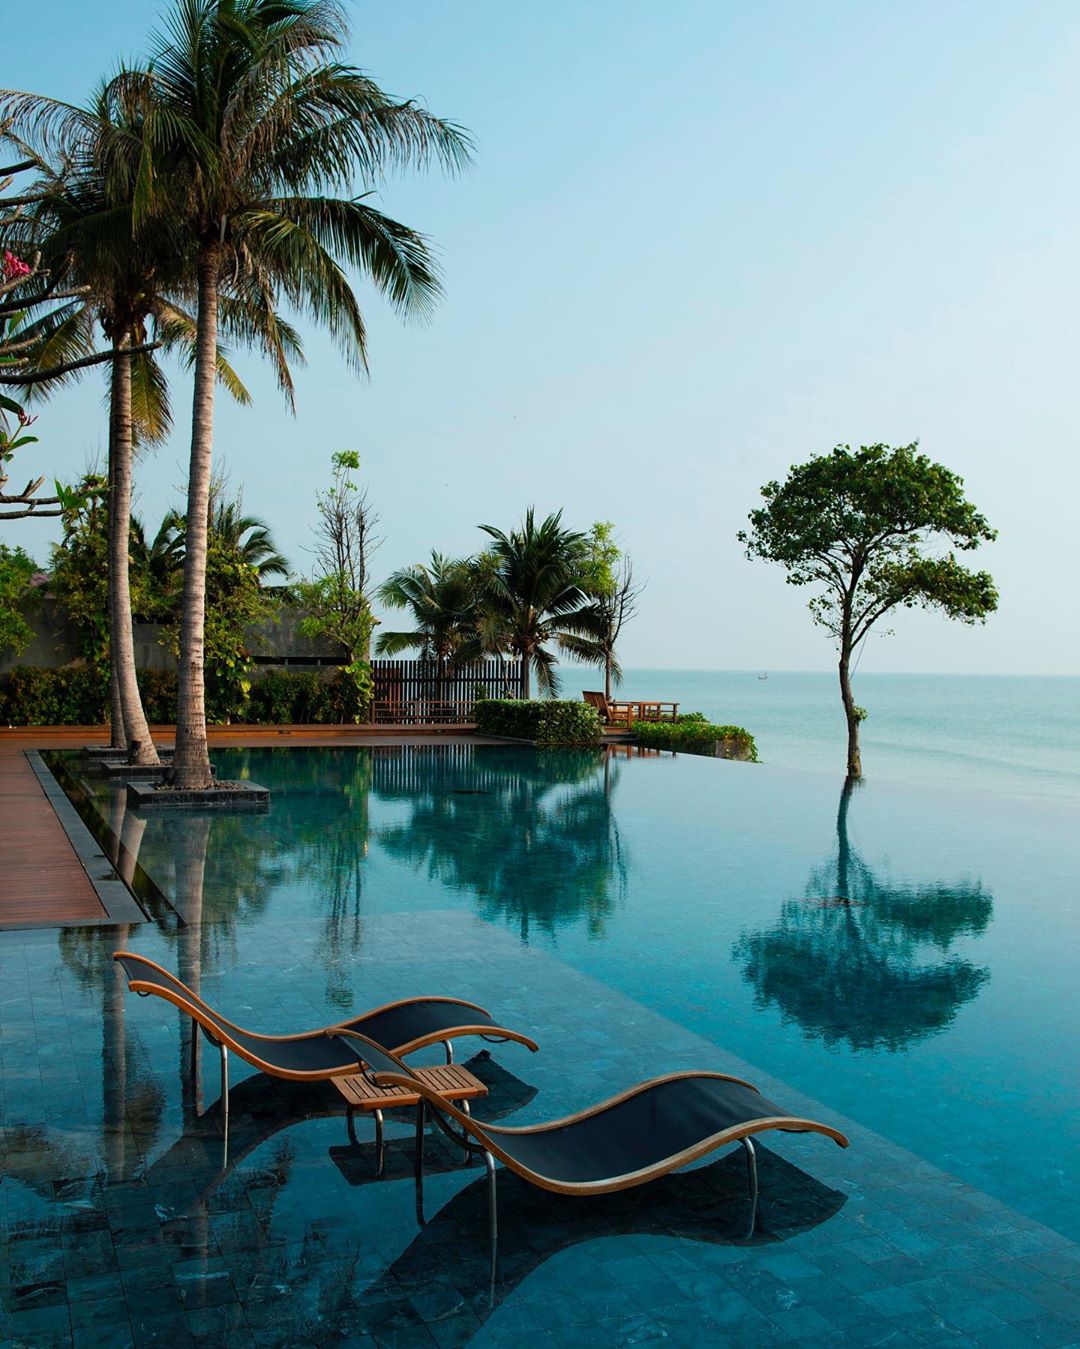 Set in the heart of Hua Hin @vvillashuahin offers a unique guest experience, from terraced private pools and sun-dappled decks ideal for alfresco dining to yoga lessons and meditation sessions.